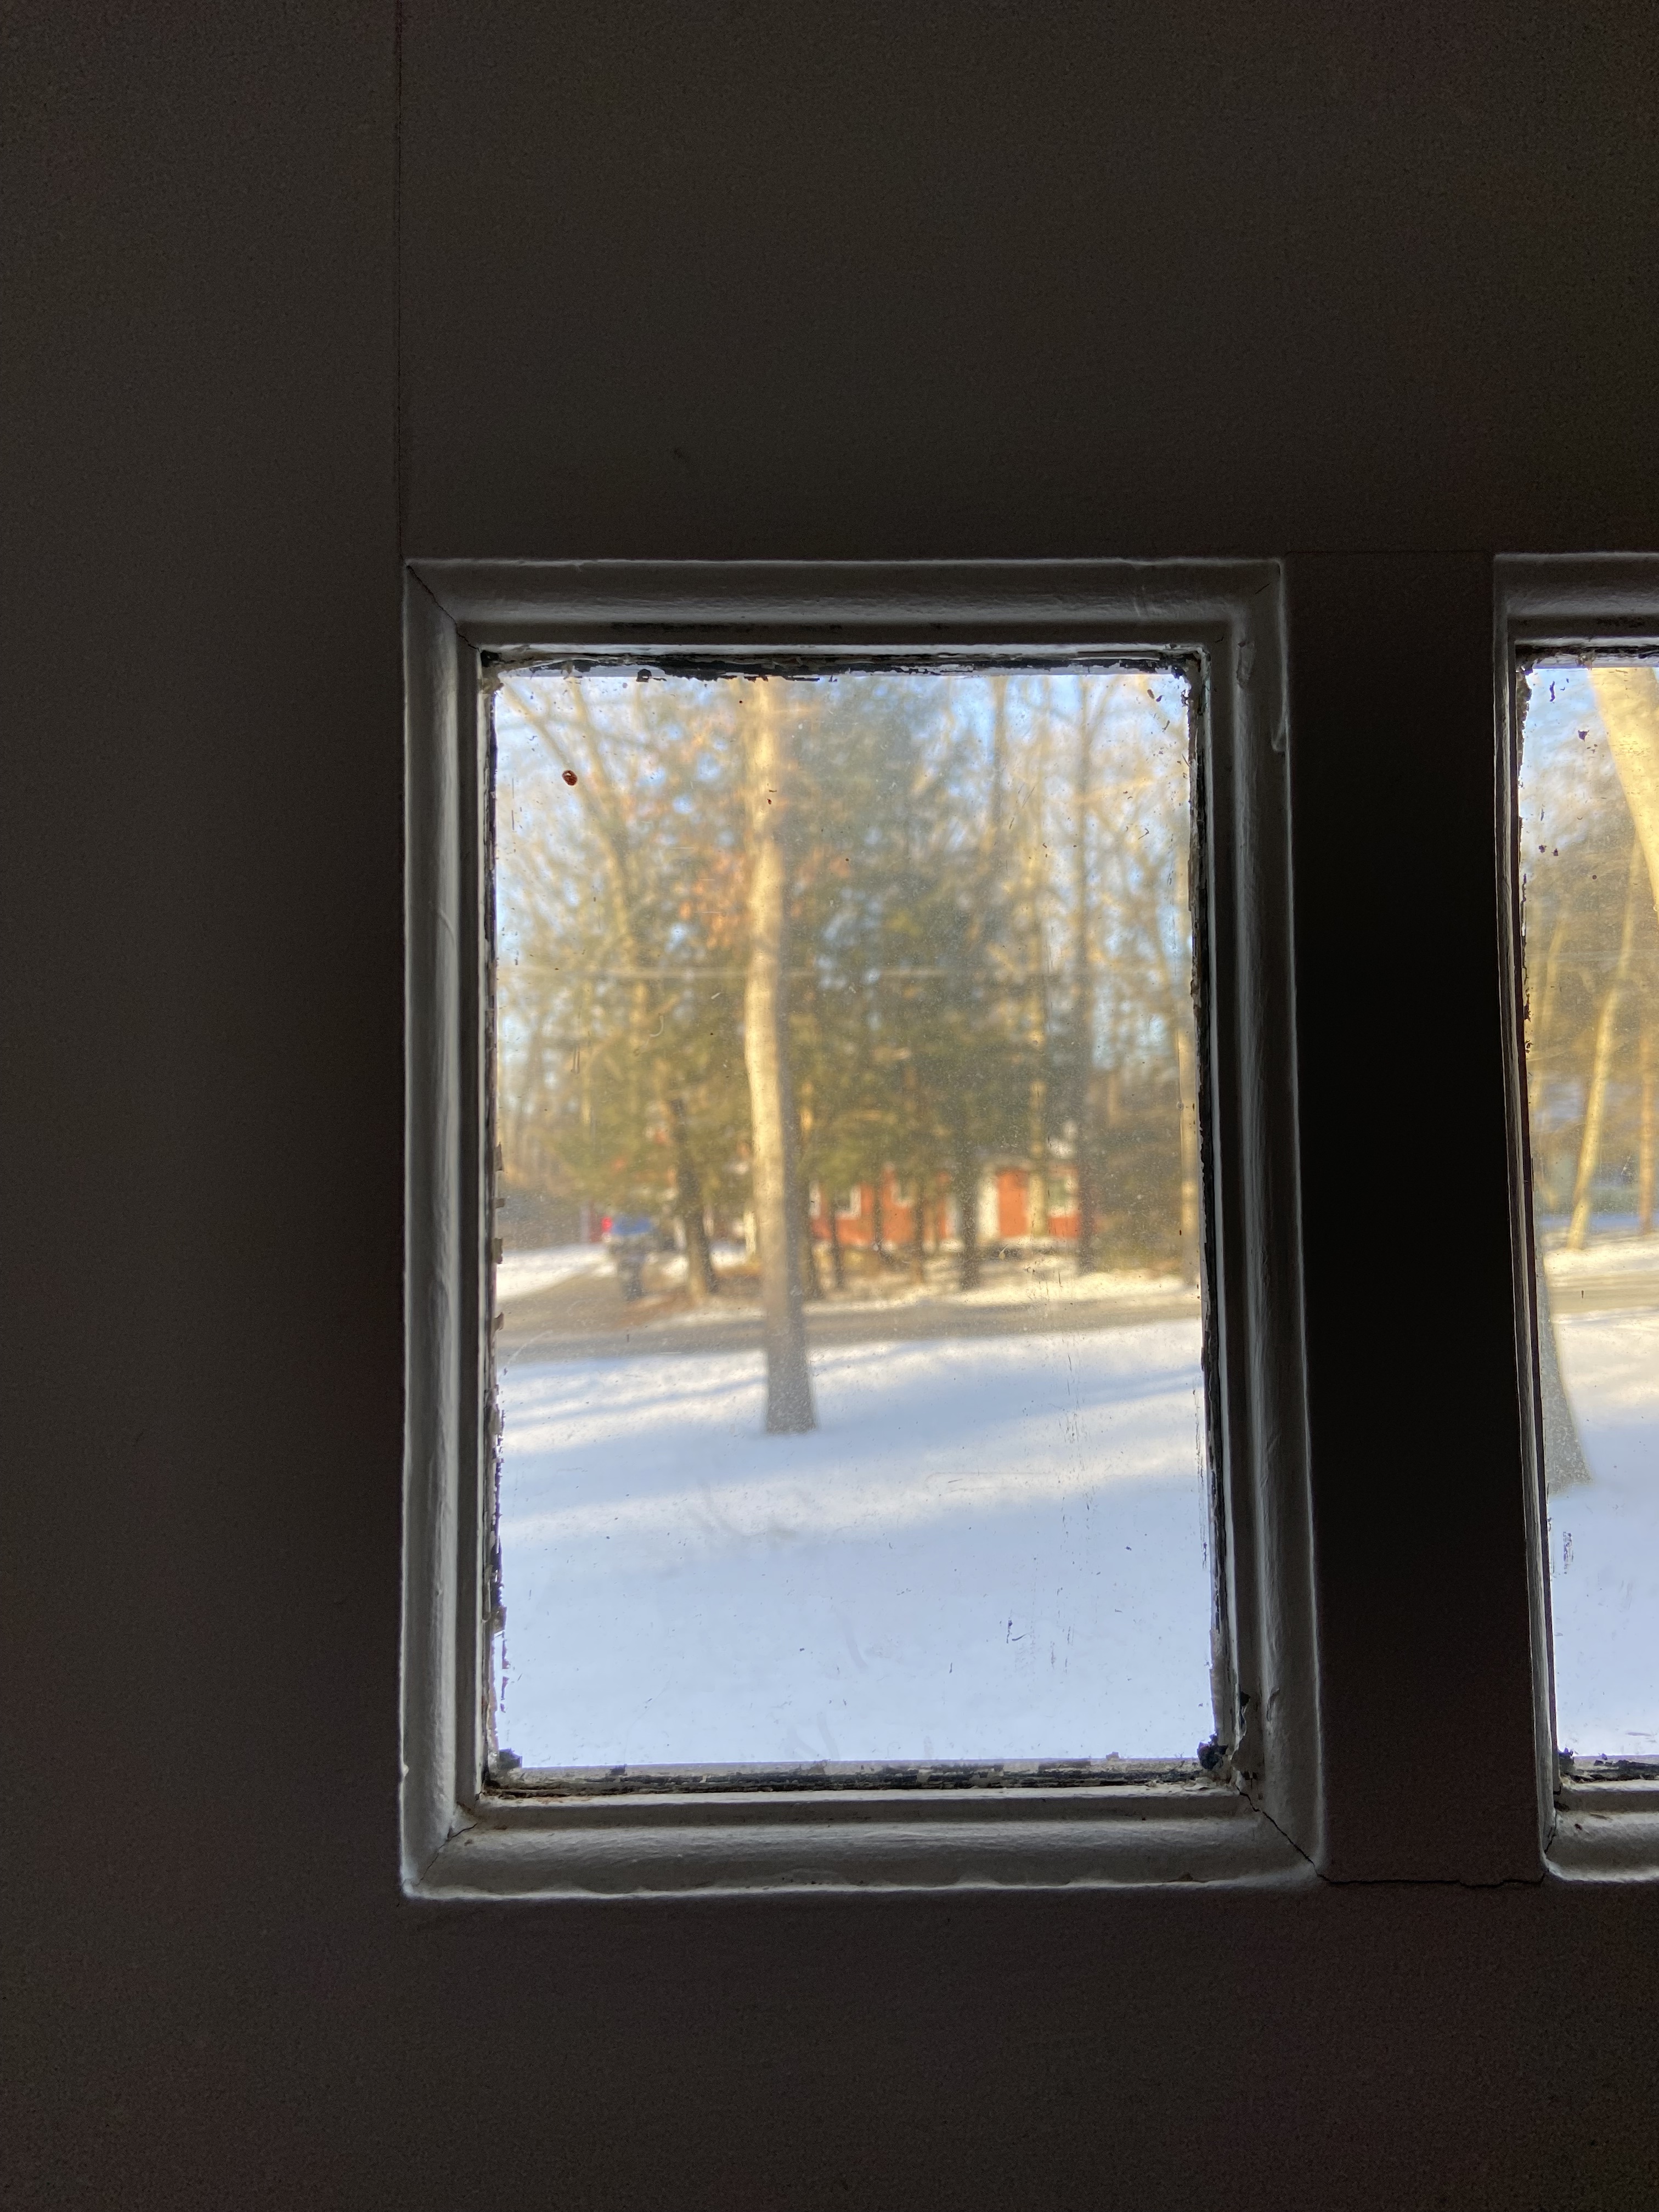 This is an image out of a small window to the front yard covered in snow. There is a red house in the background and a tree in the middle ground